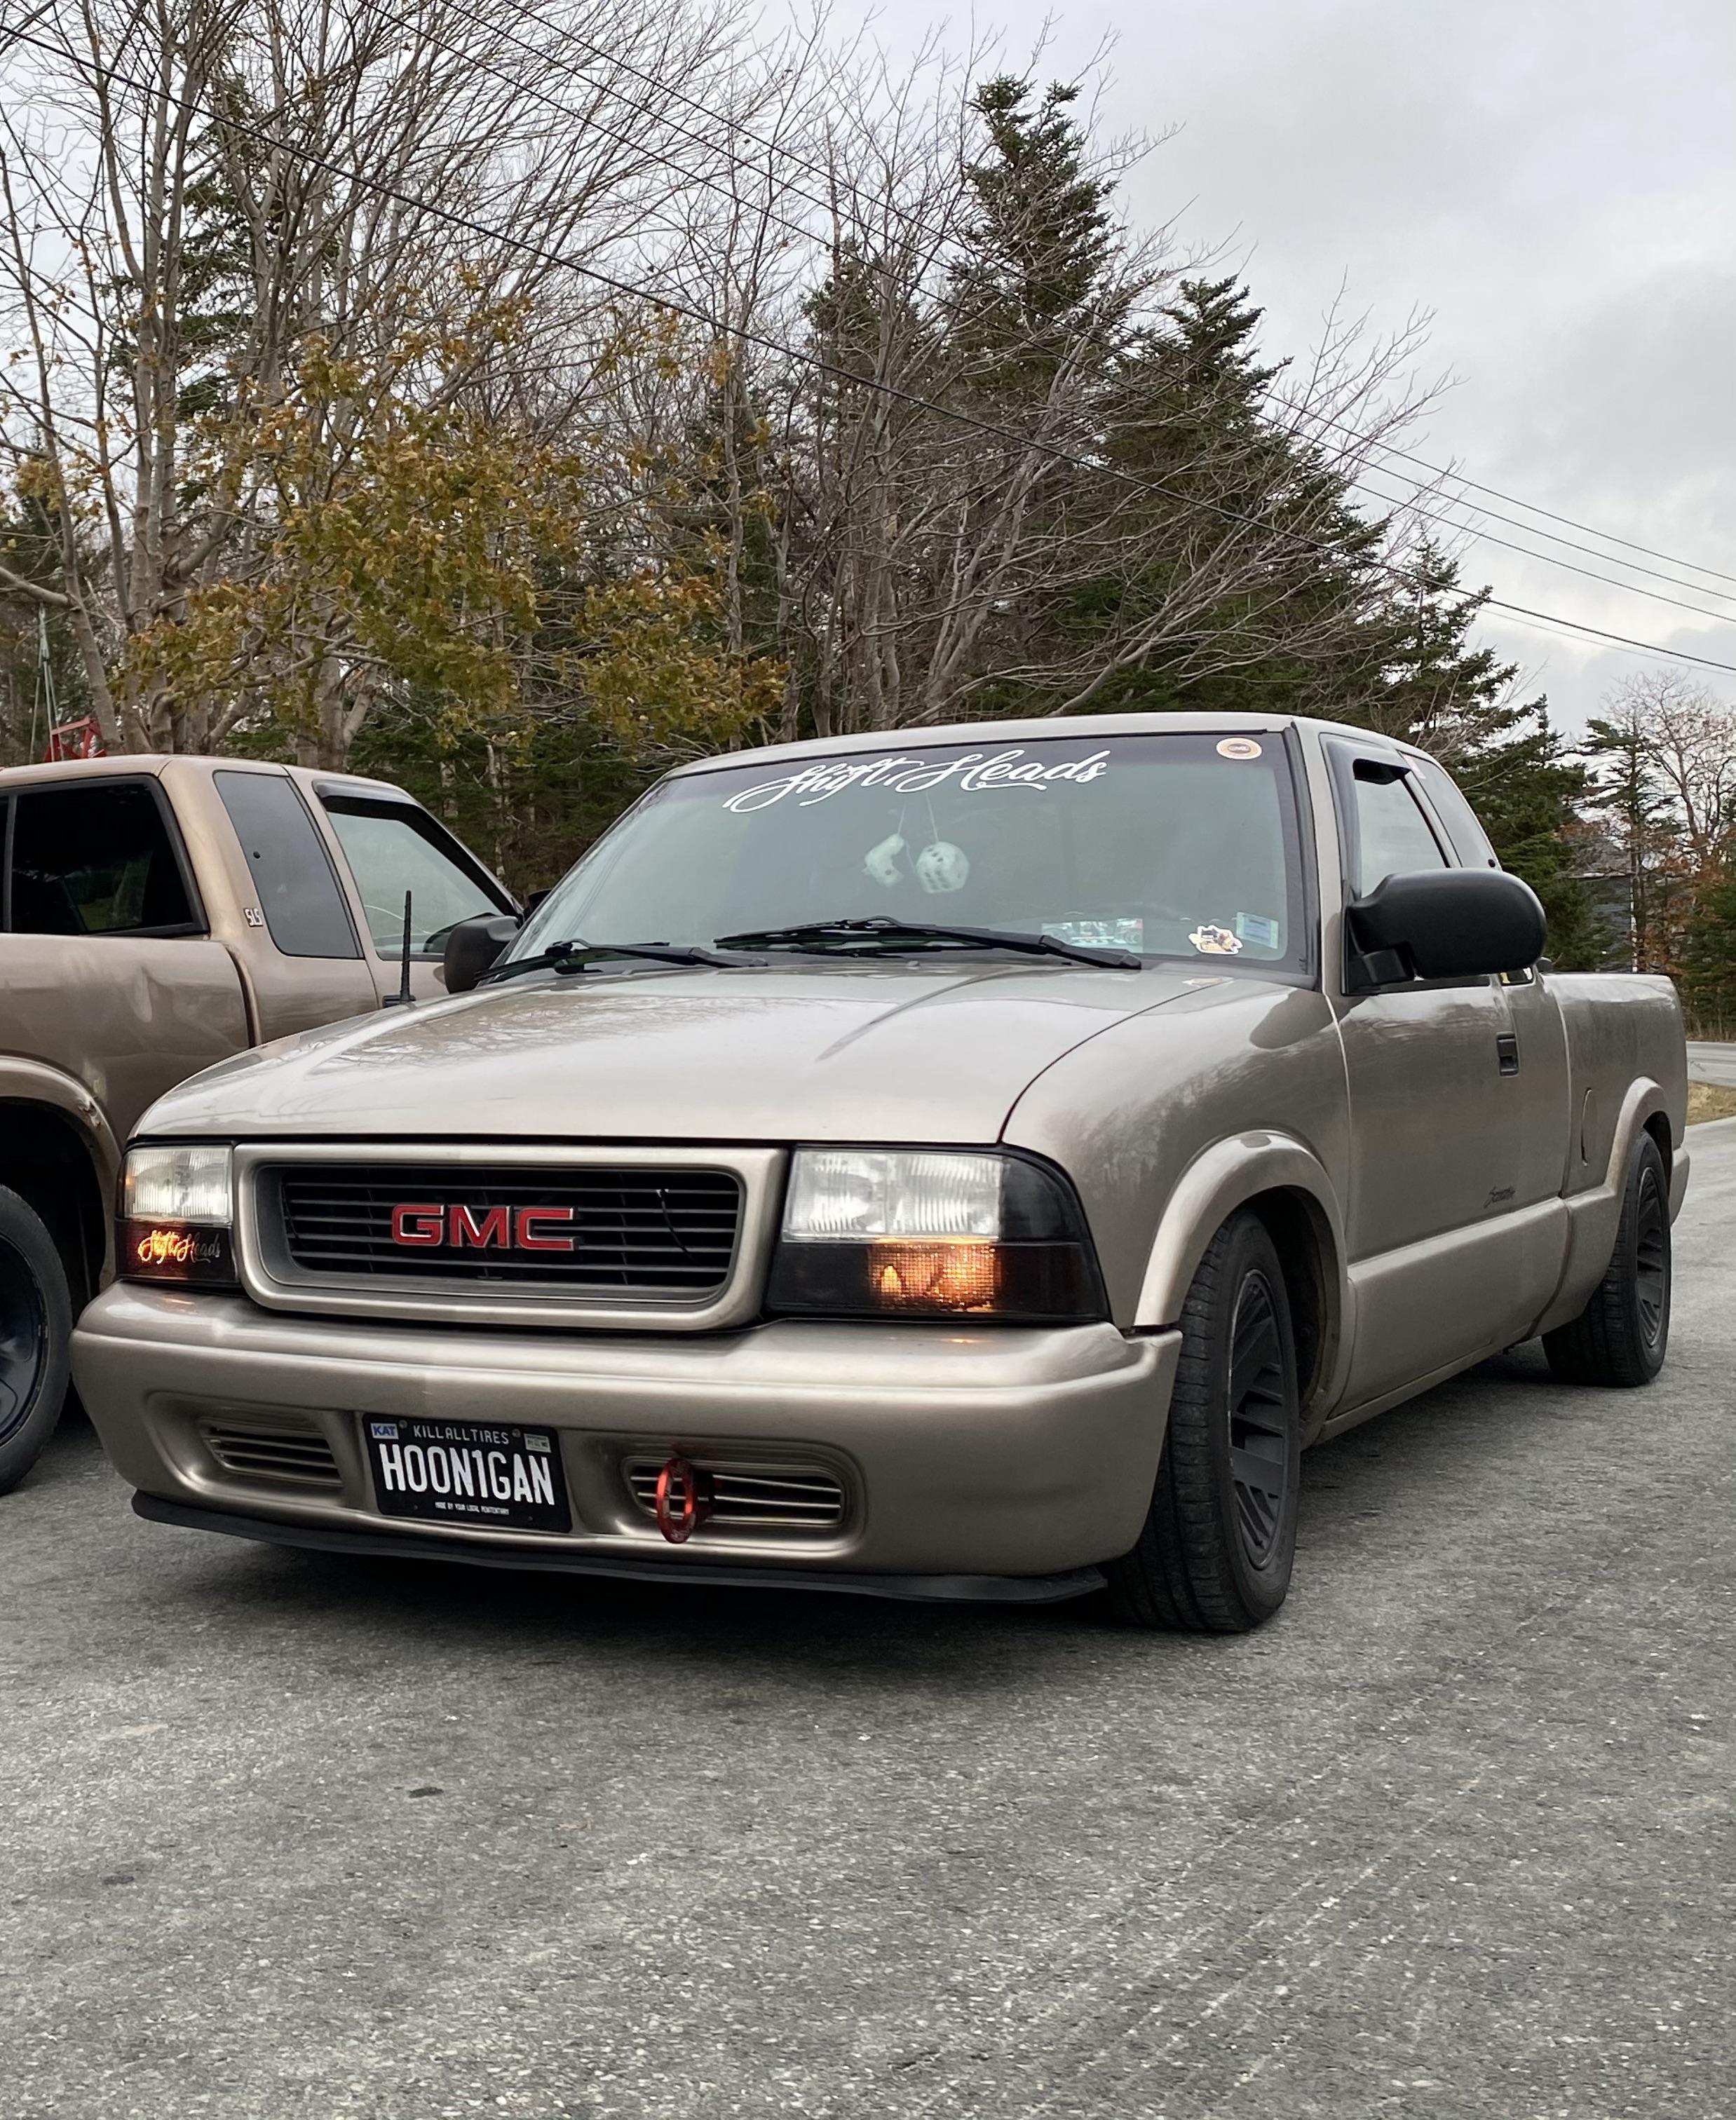 Slammed 2003 GMC Sonoma. Trans am wheels with dumb spacers to make them  work. Full of Japanese stickers. Flush mount tonneau cover. Frame scrapes  on everything. : r/RoastMyCar